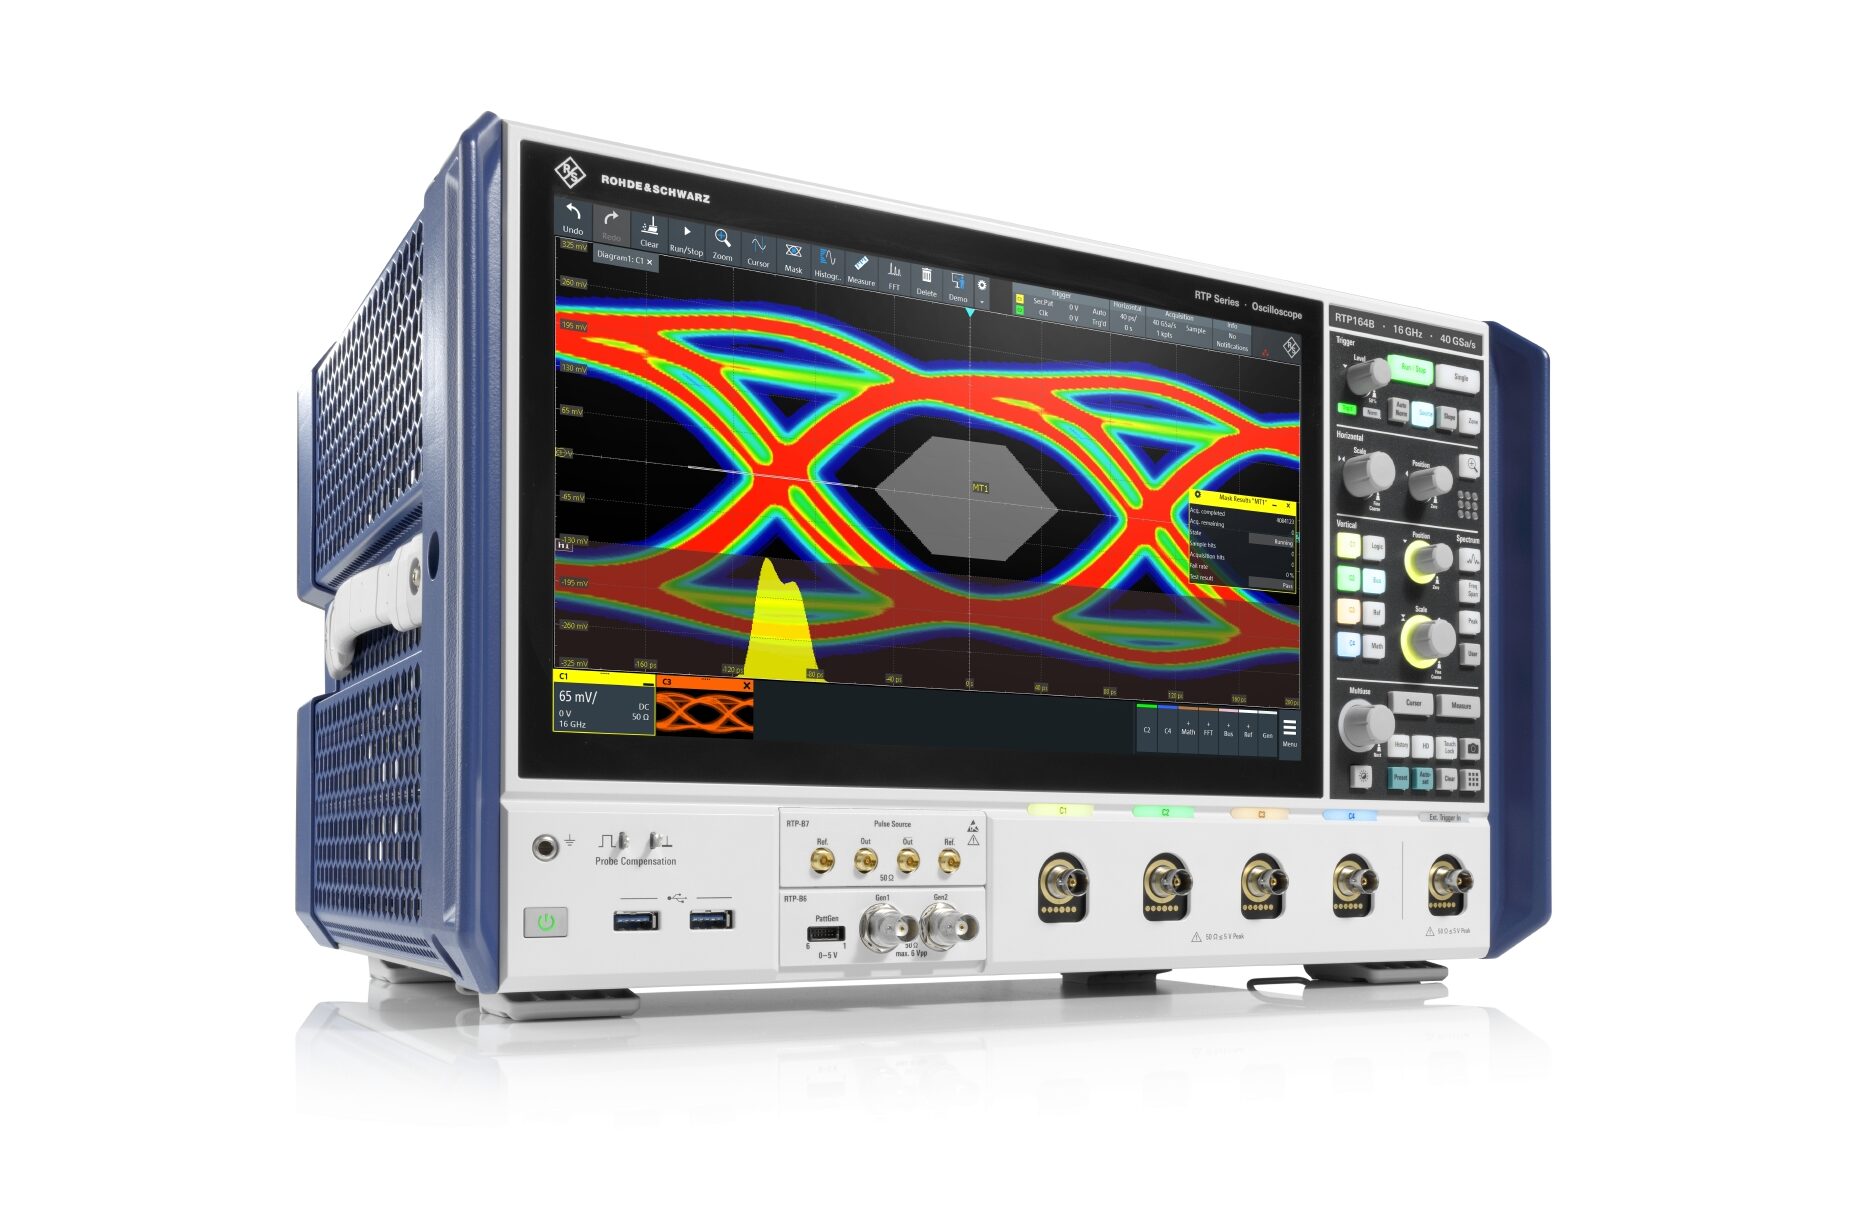 Rohde & Schwarz enhances R&S RTP high-performance oscilloscope for even better signal integrity in real time